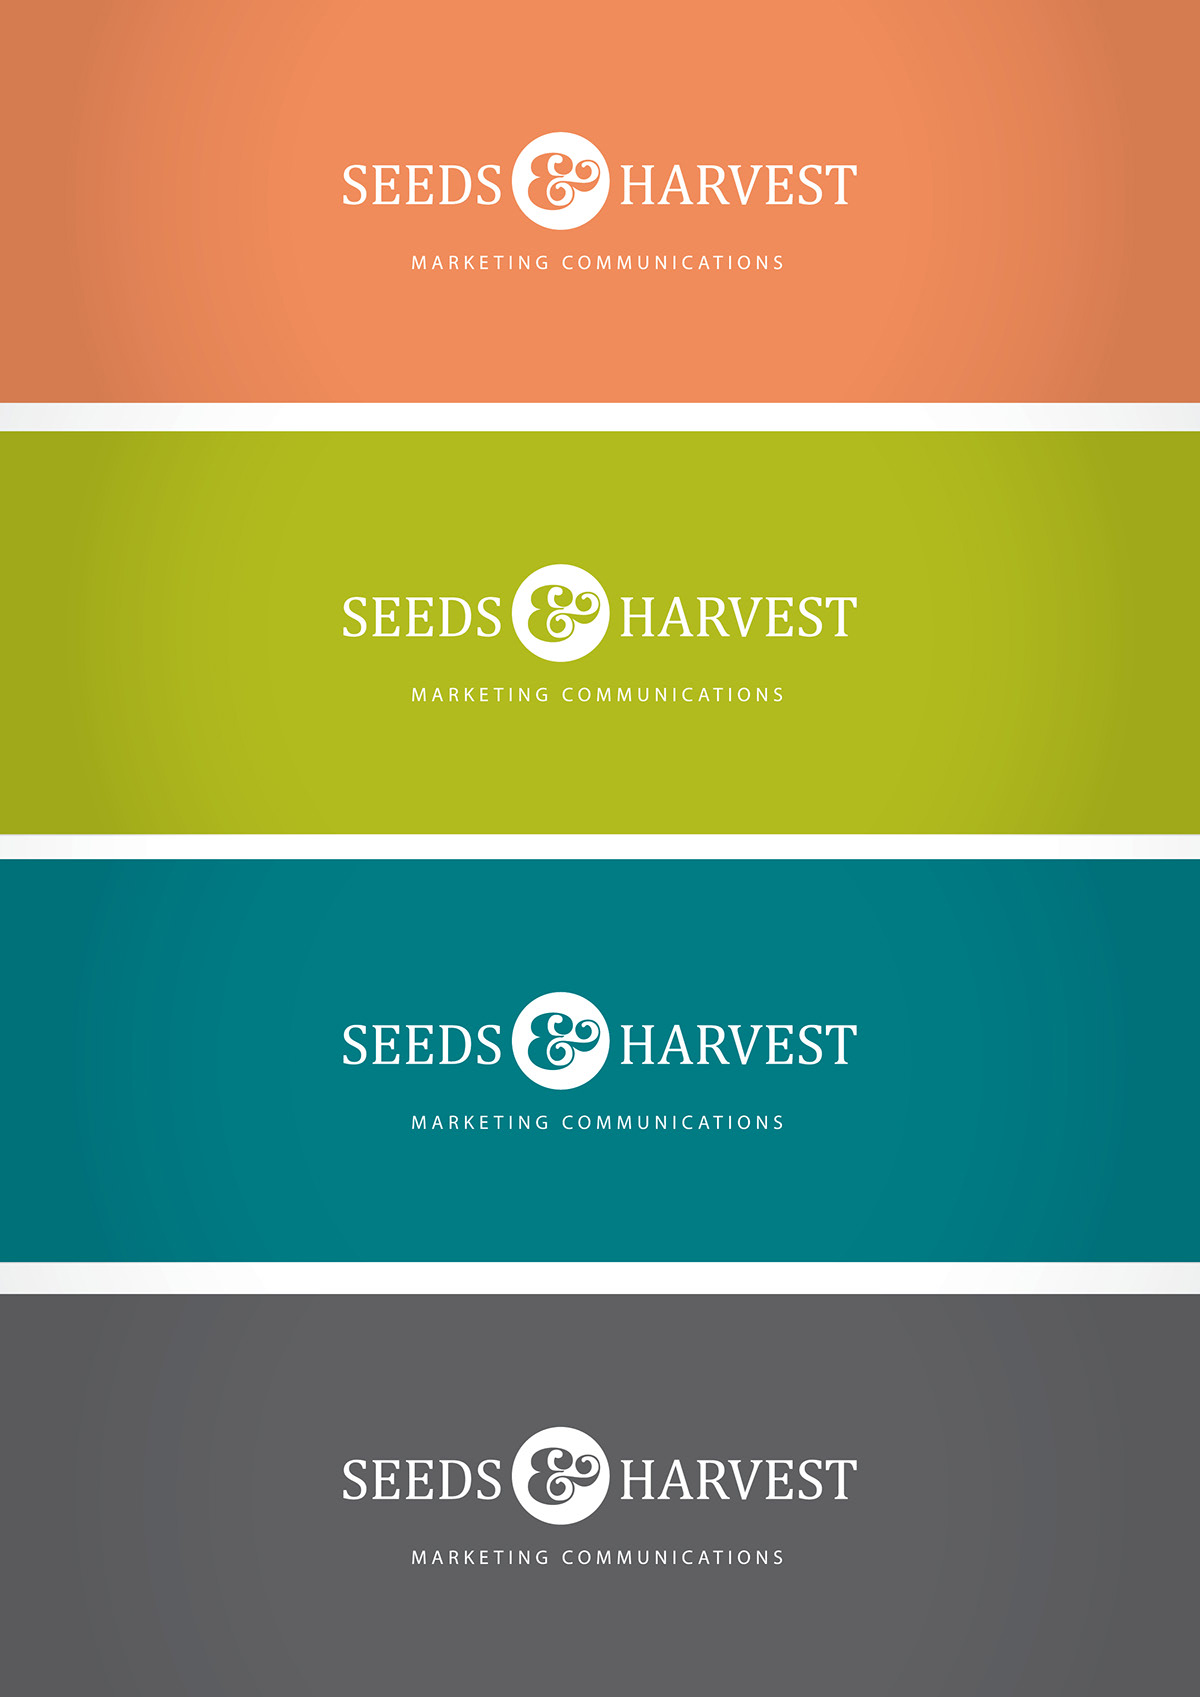 Corporate Identity logo brand personality marketing   communications Seeds and Harvest western australia Wine and Tourism